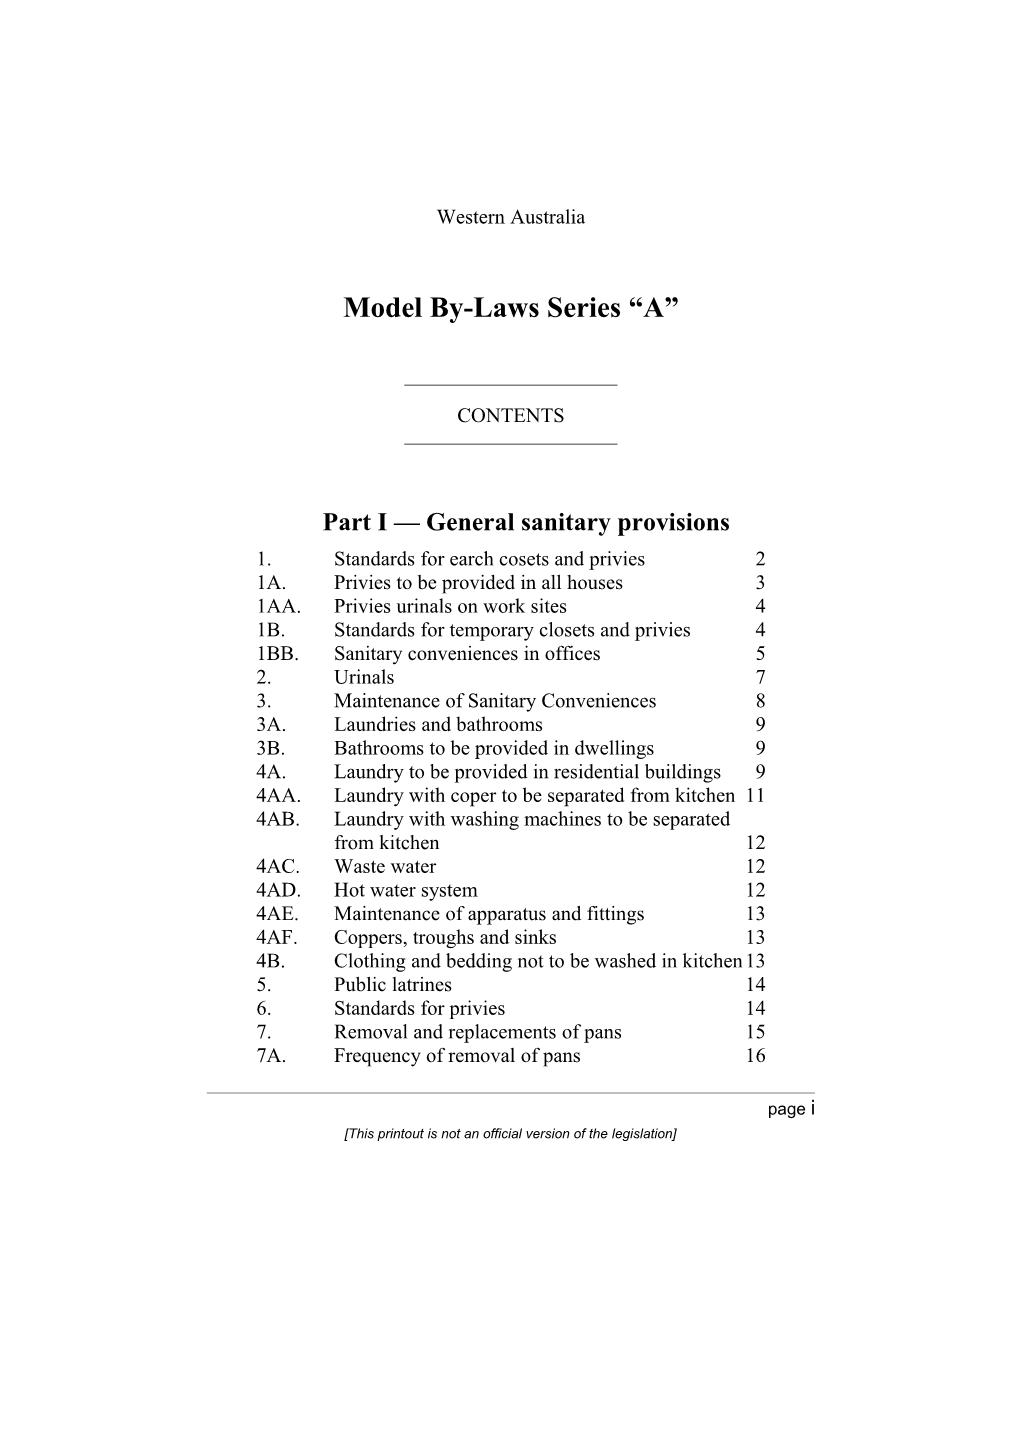 Model By-Laws Series A